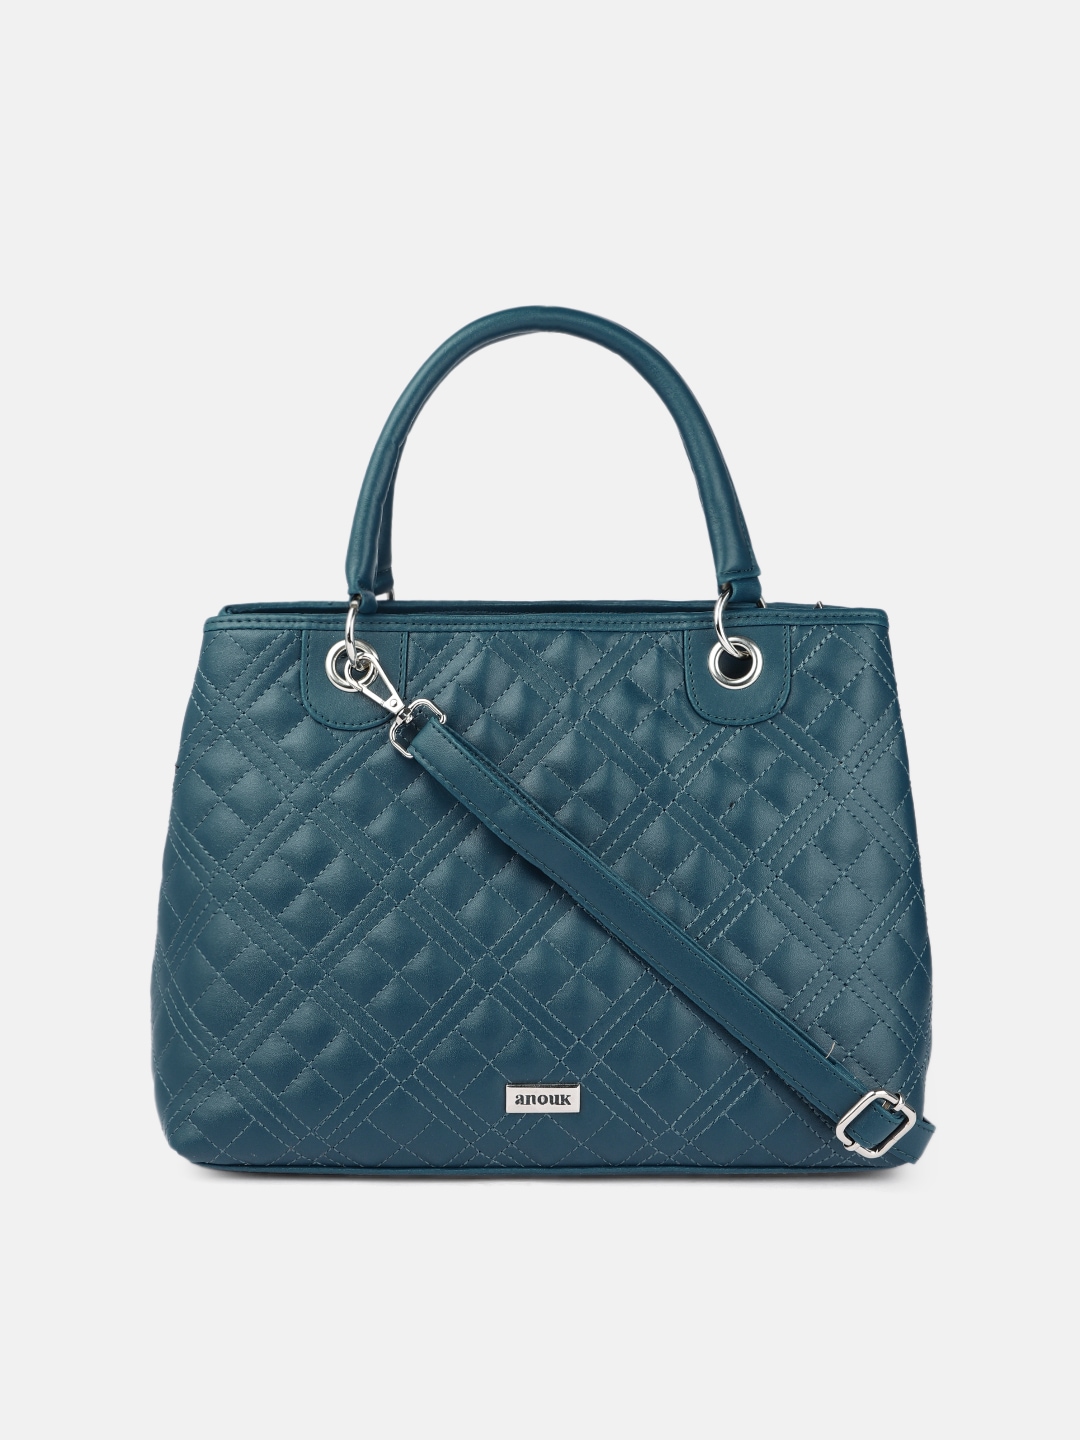 Anouk Teal Structured Handheld Bag with Quilted Price in India